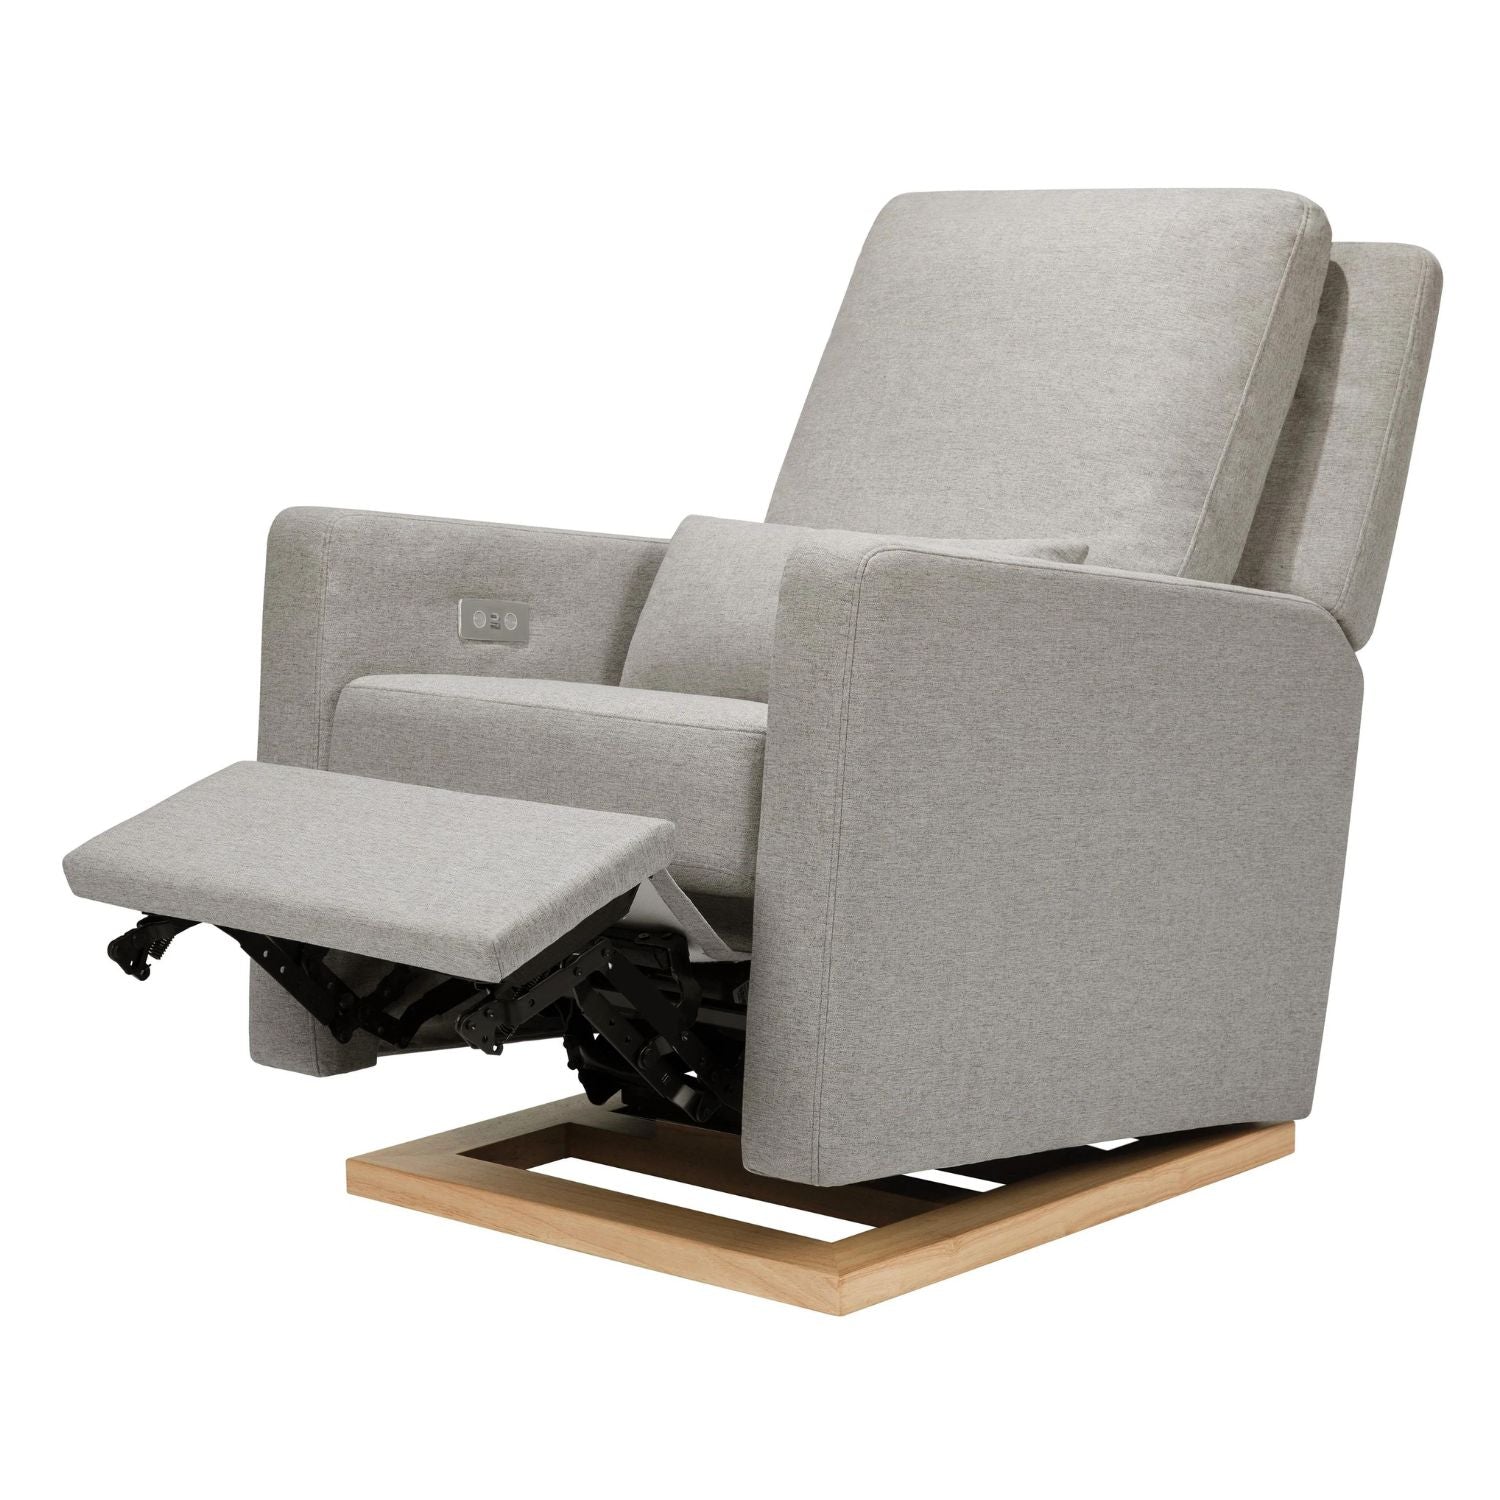 Babyletto Sigi Electronic Recliner and Glider with USB Port - Performance Grey Eco-Weave with Light Wood Base